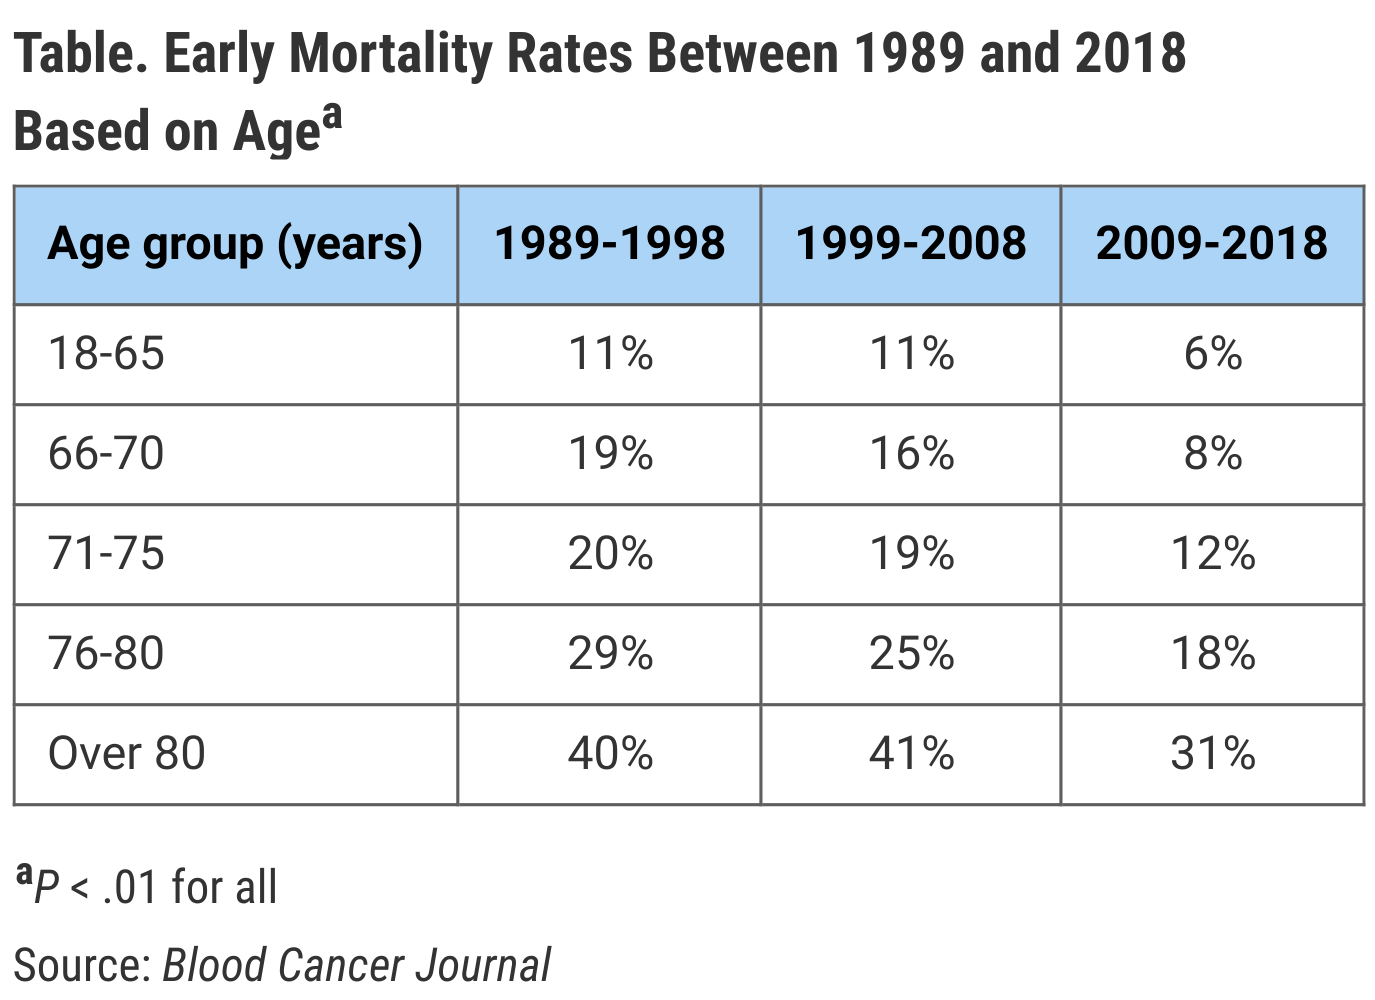 Table. Early Mortality Rates Between 1989 and 2018 Based on Age 